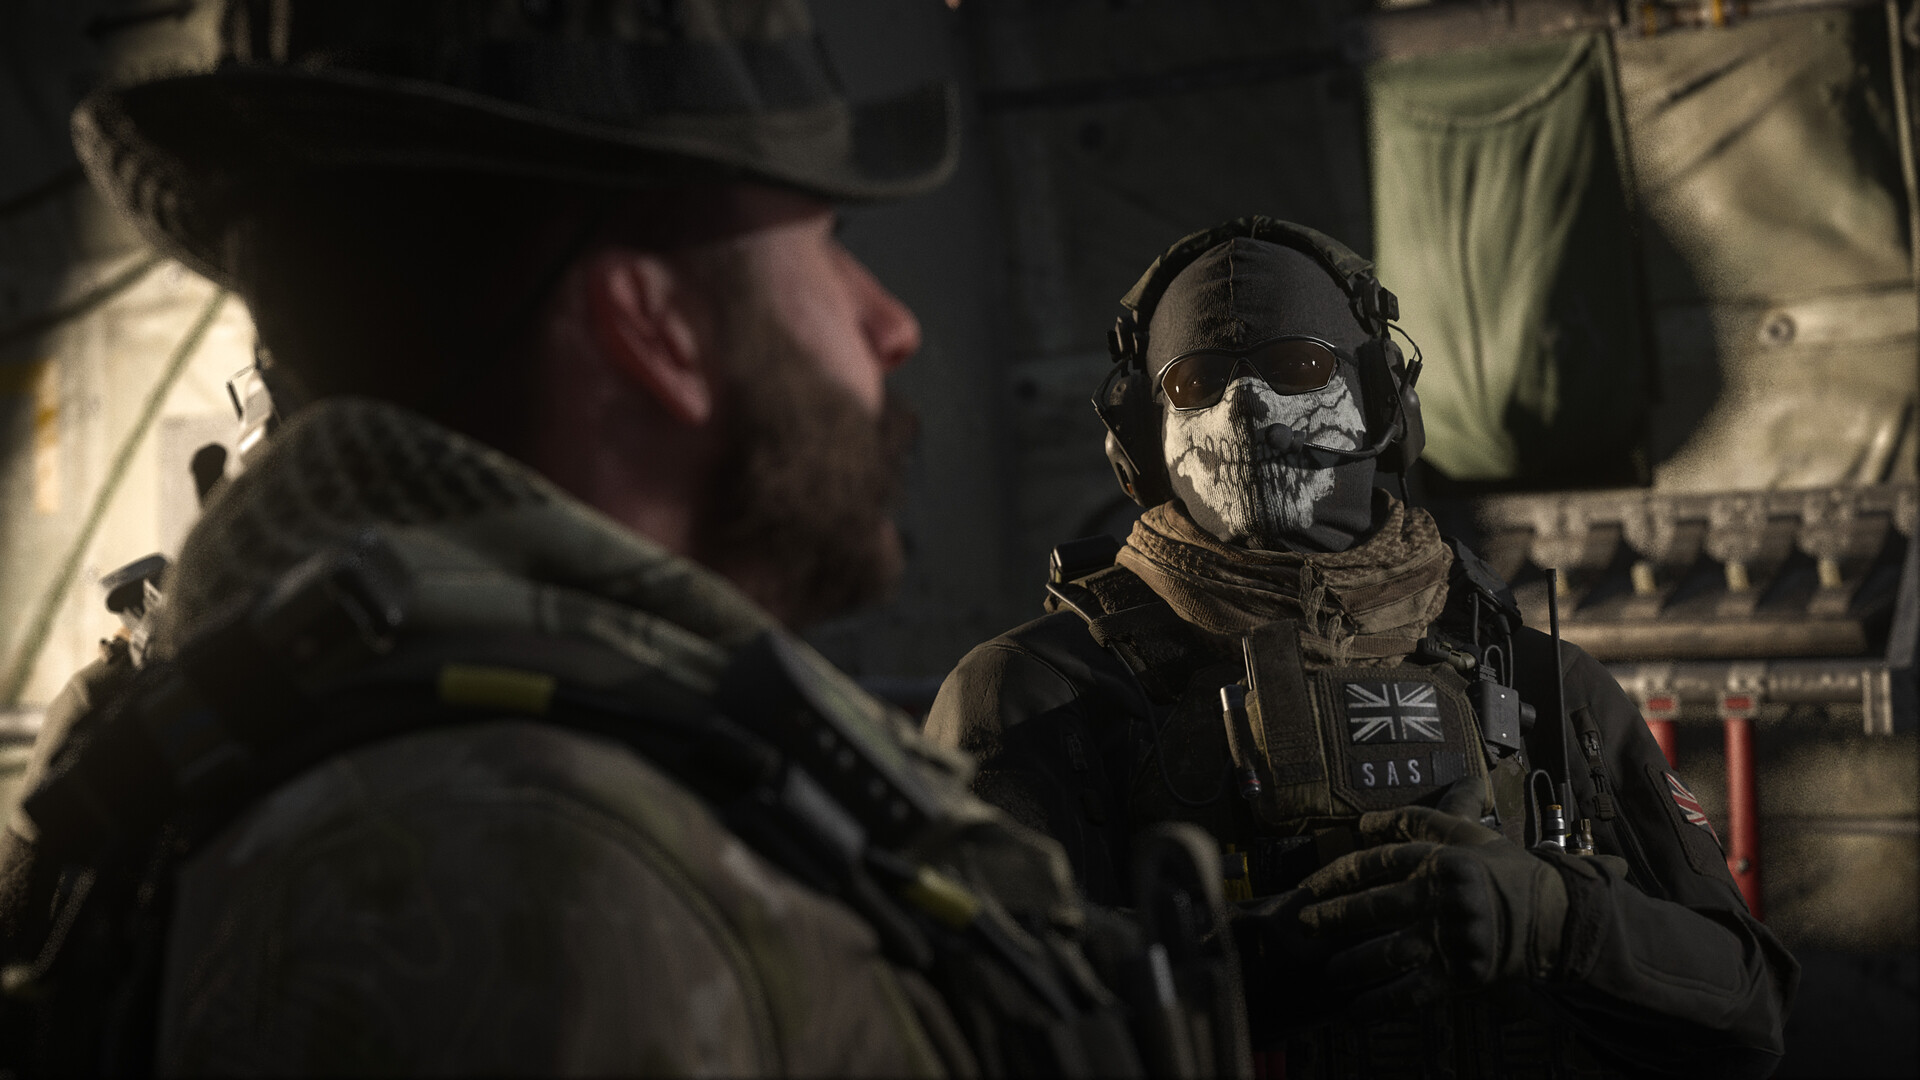 Call of Duty: Modern Warfare Requires an Activision Account For Cross-Play